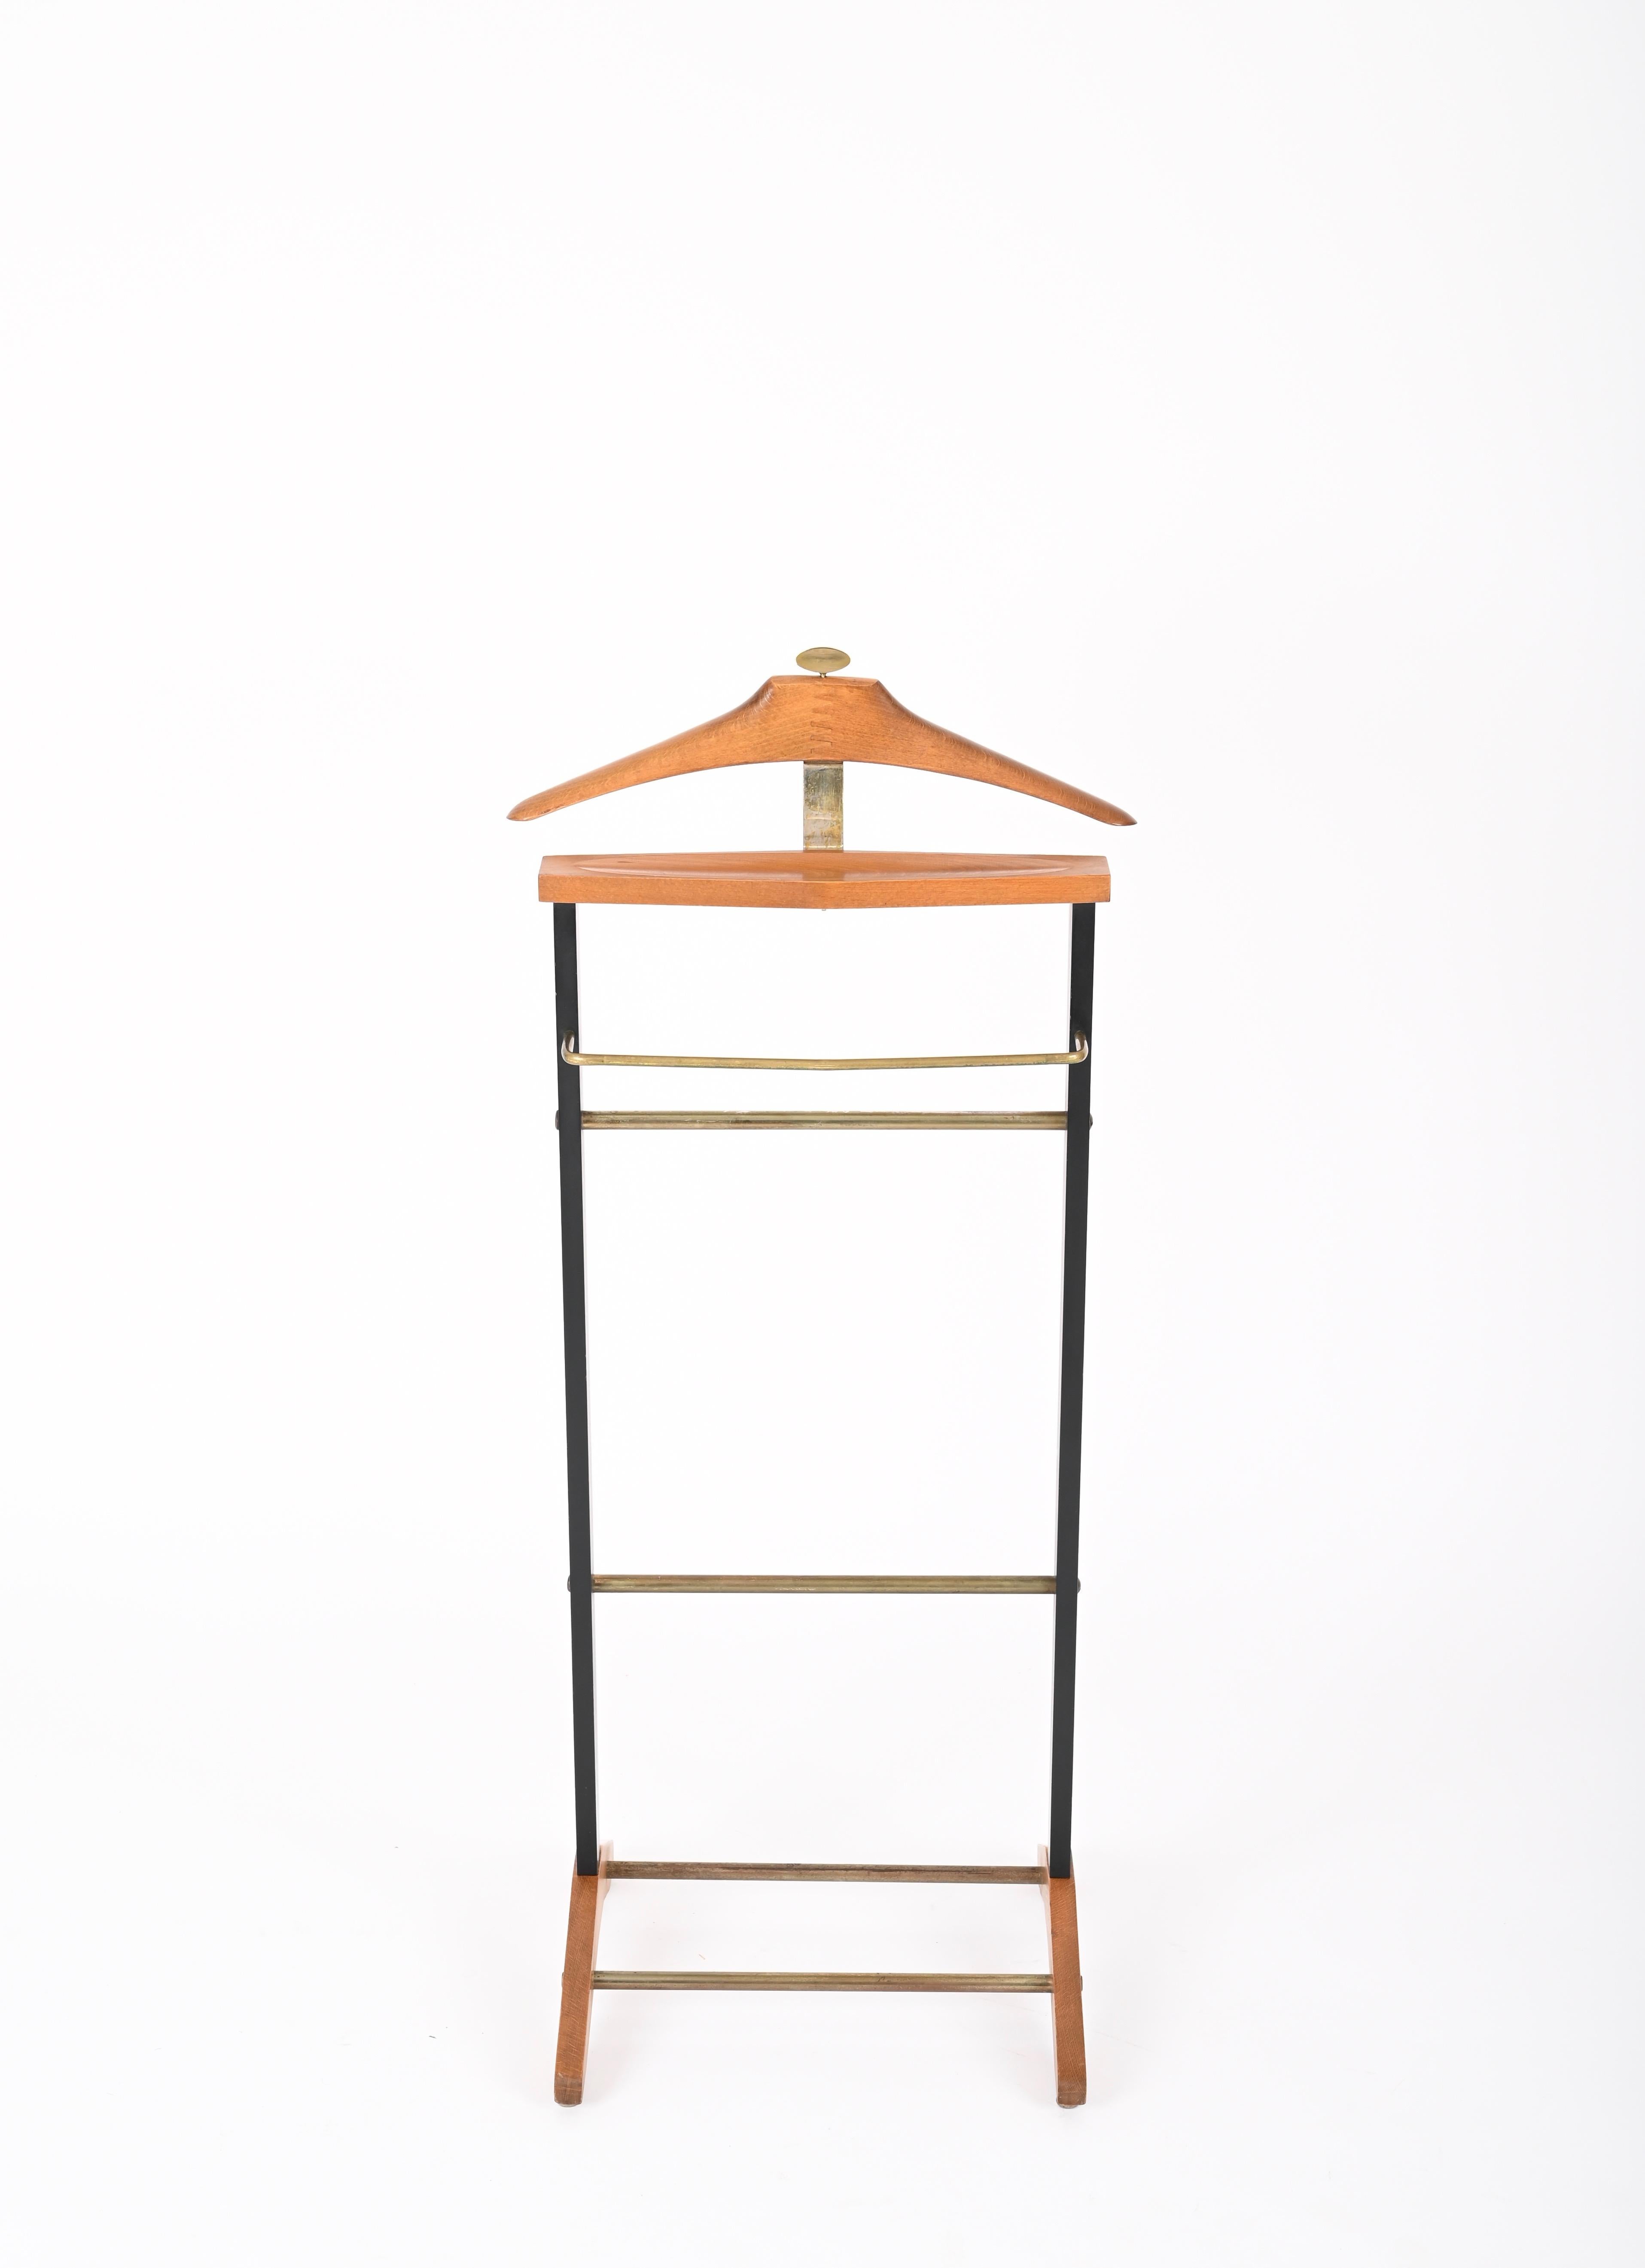 Ico Parisi Valet Beech and Brass Coat Stand for Fratelli Reguitti, Italy 1960s For Sale 5